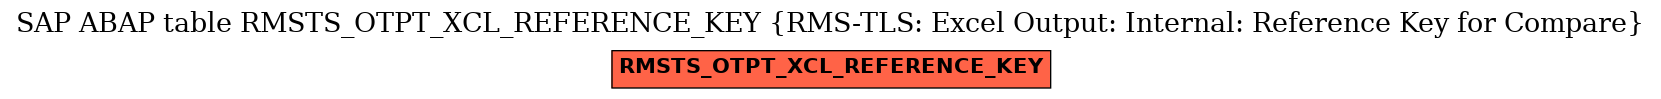 E-R Diagram for table RMSTS_OTPT_XCL_REFERENCE_KEY (RMS-TLS: Excel Output: Internal: Reference Key for Compare)